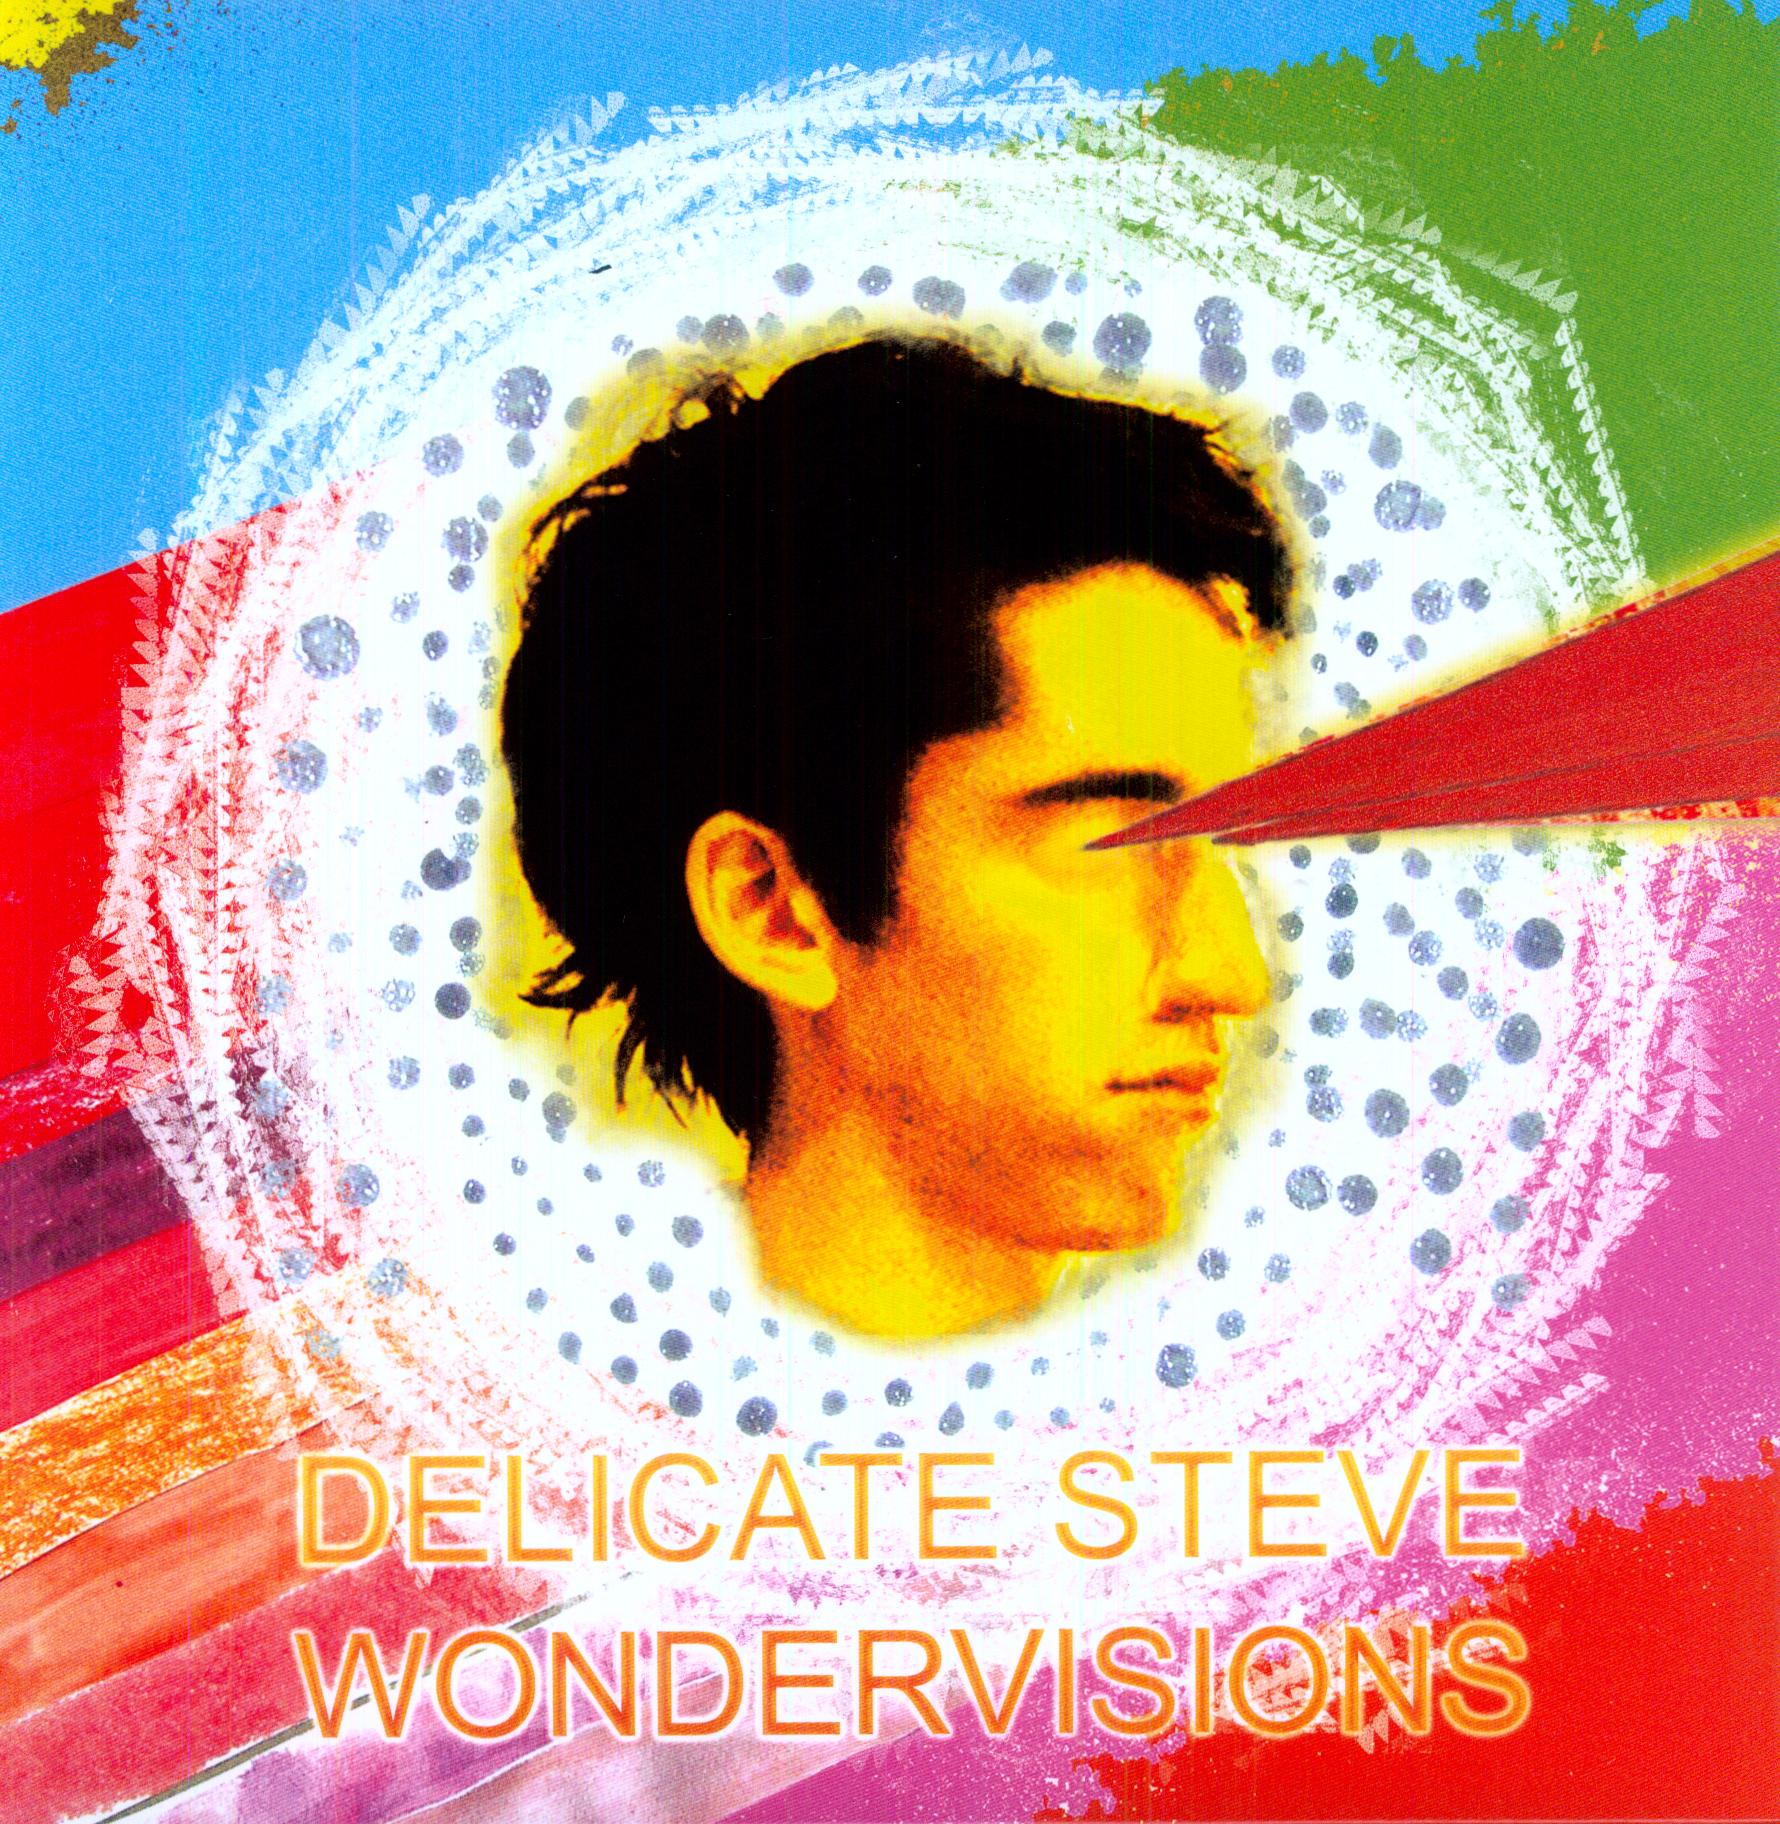 WONDERVISIONS